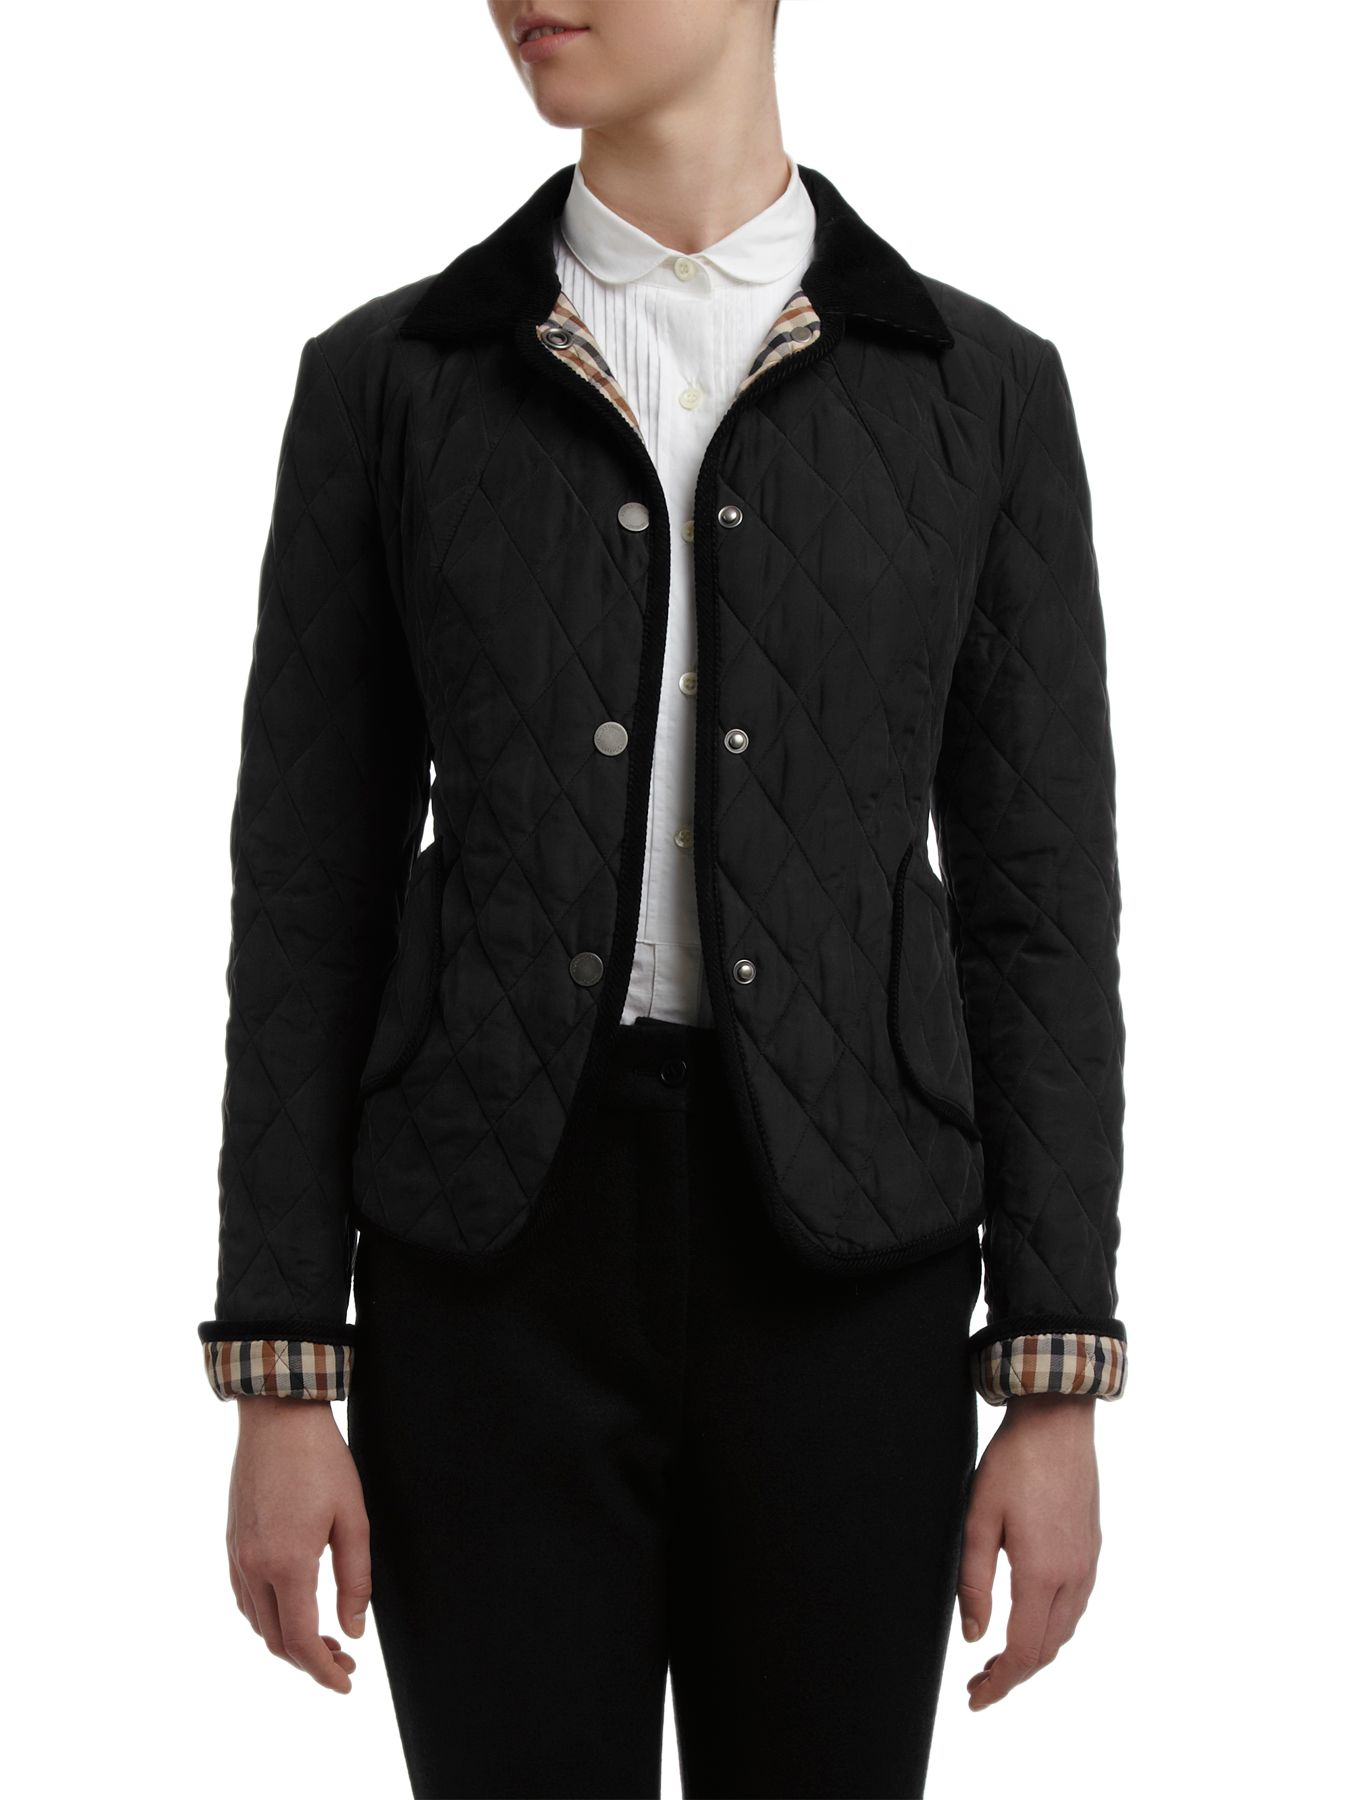 Aquascutum Short Fitted Quilted Jacket, Black at John Lewis